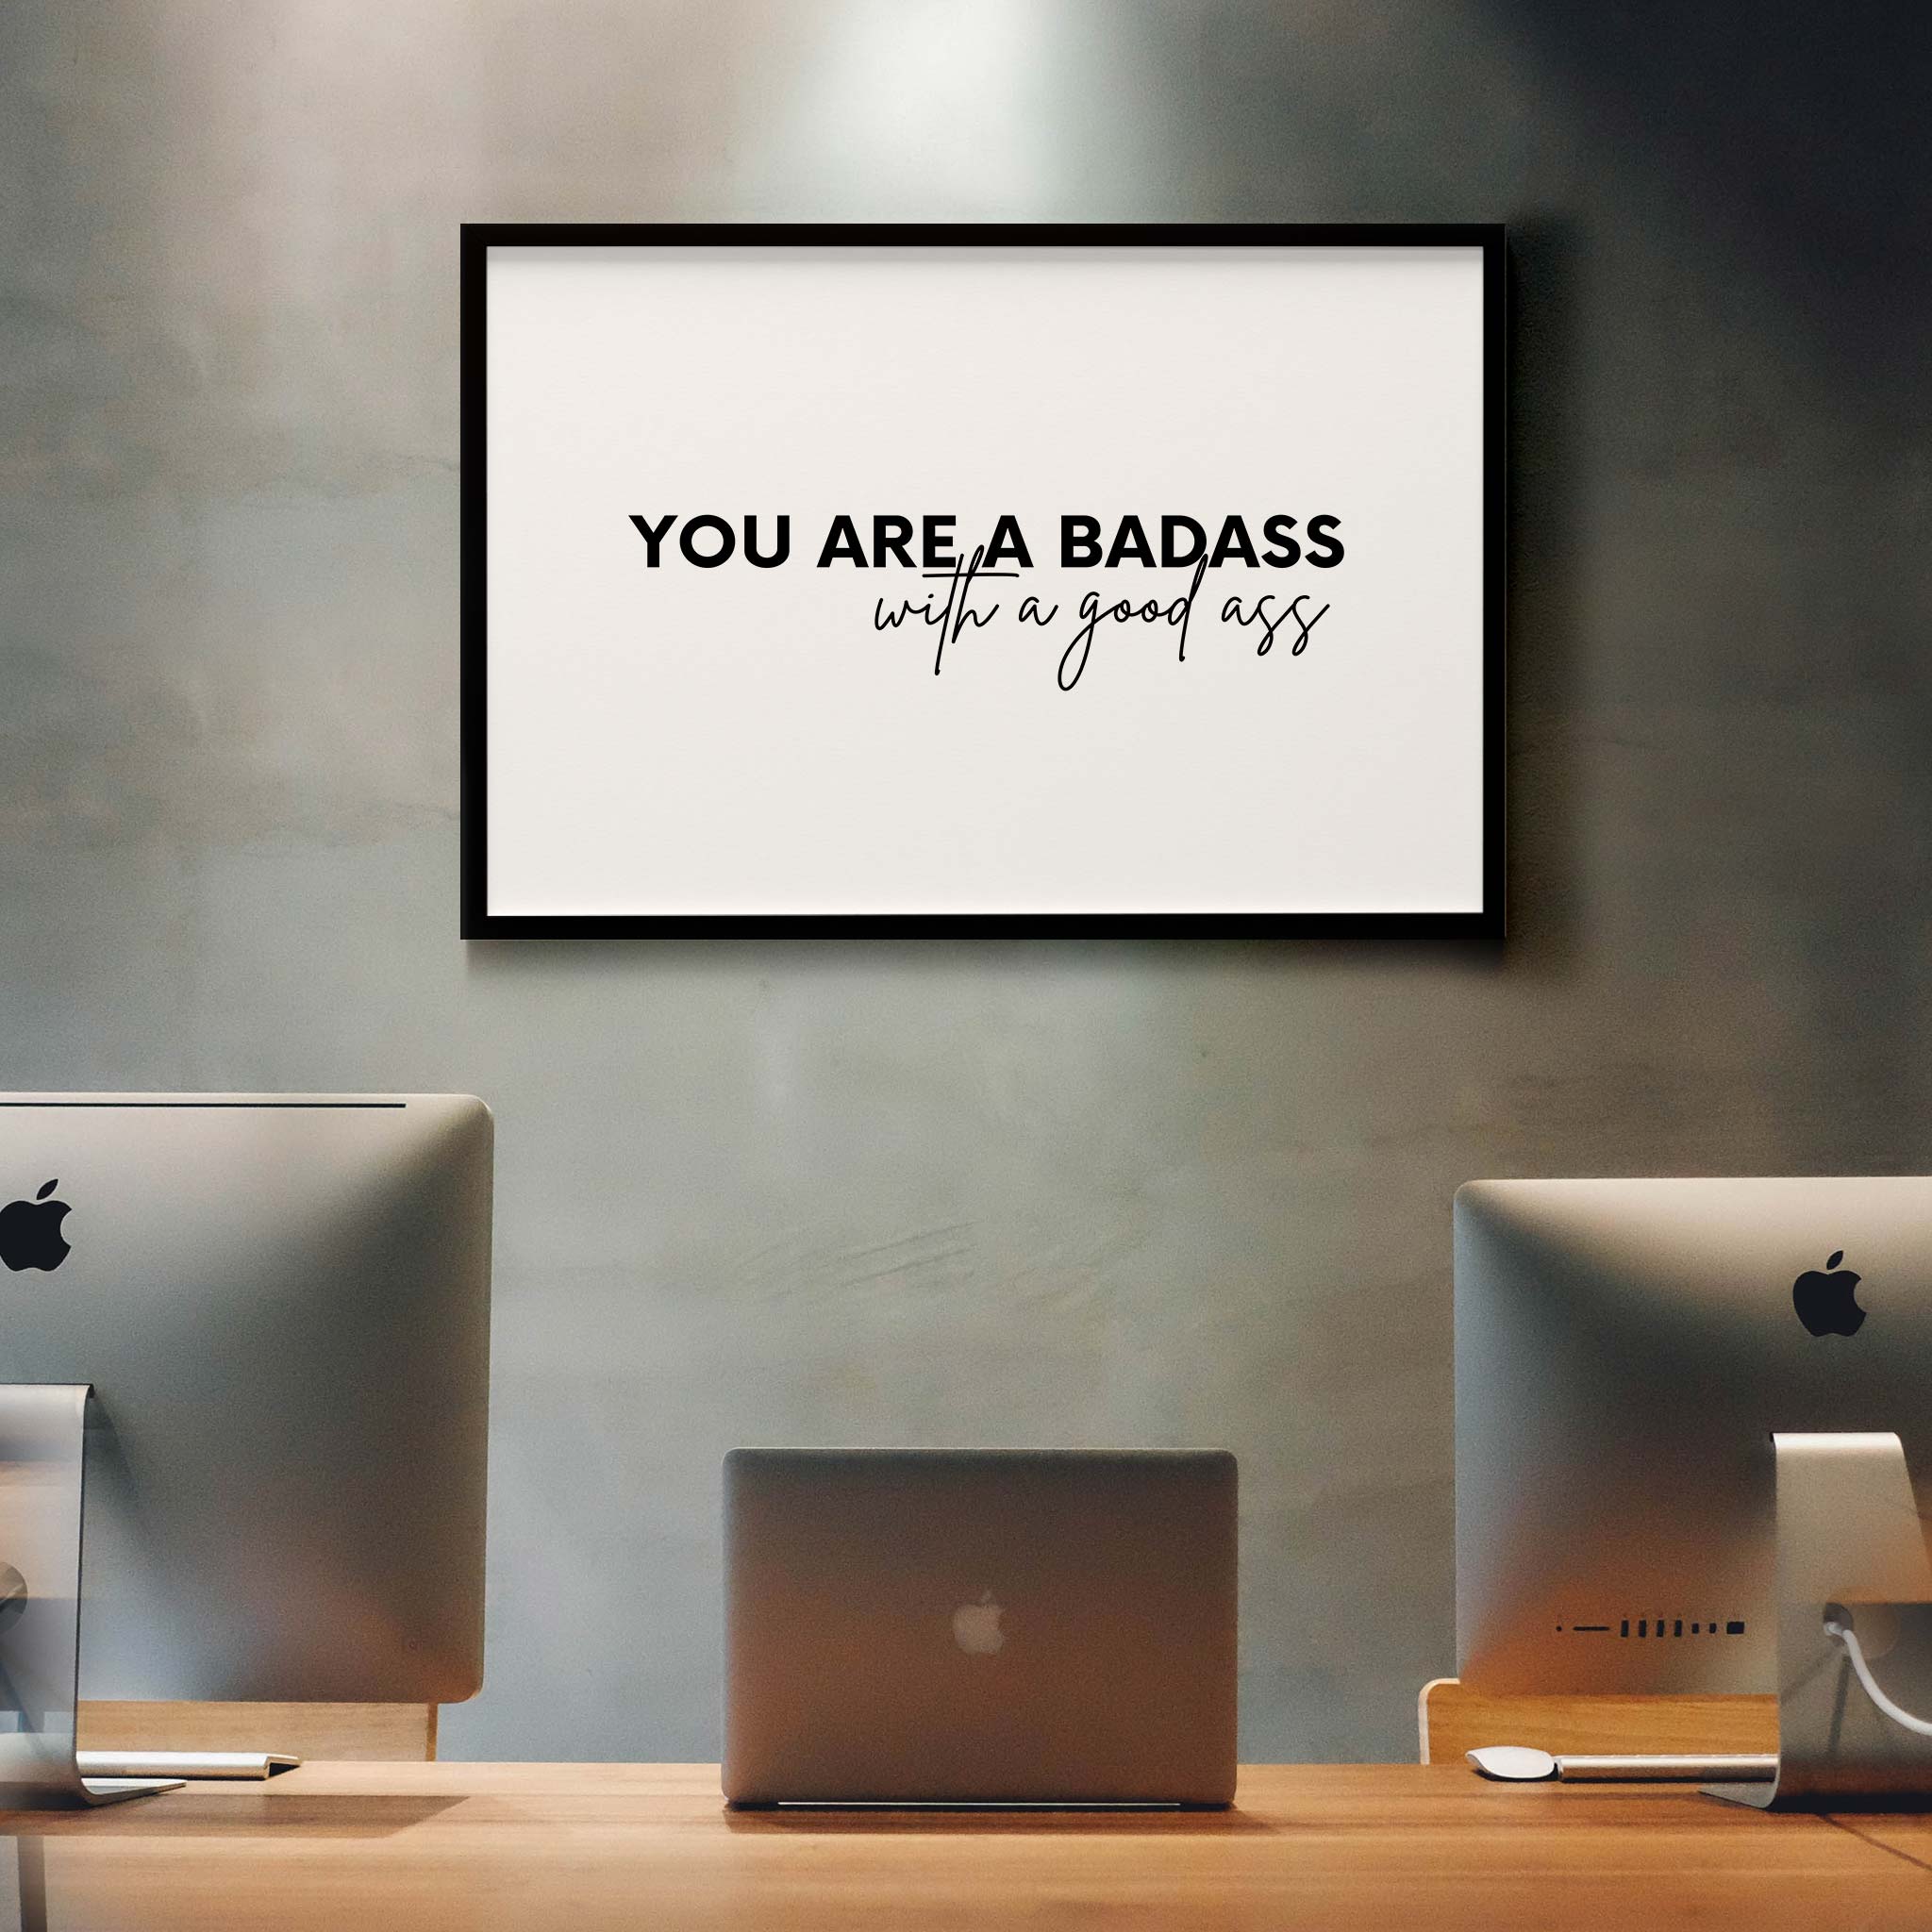 You are a badass with a good ass